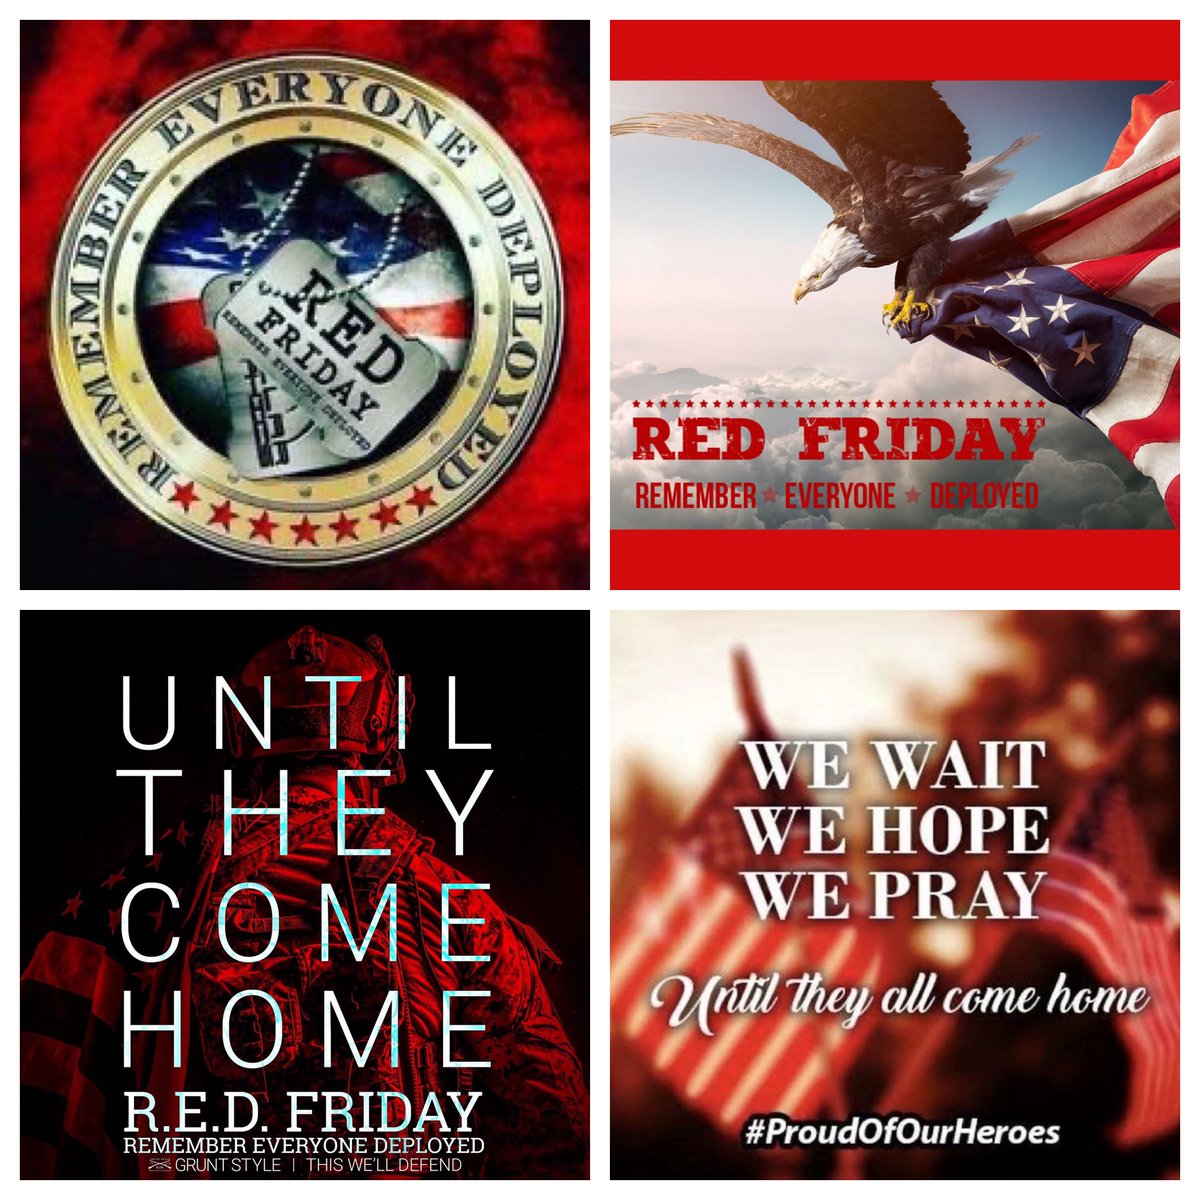 GM! RED Friday!!🫡🇺🇸🫡🇺🇸 Praying for those deployed…so much gratitude for their courage, bravery and sacrifices! ✝️ 🕊️May God watch over and keep them safe until they all return home to their loved ones!🕊️❤️🇺🇸💙🇺🇸❤️ My FOREVER love and respect! 🇺🇸🇺🇸🇺🇸❤️🫶🏻 “But the Lord is…